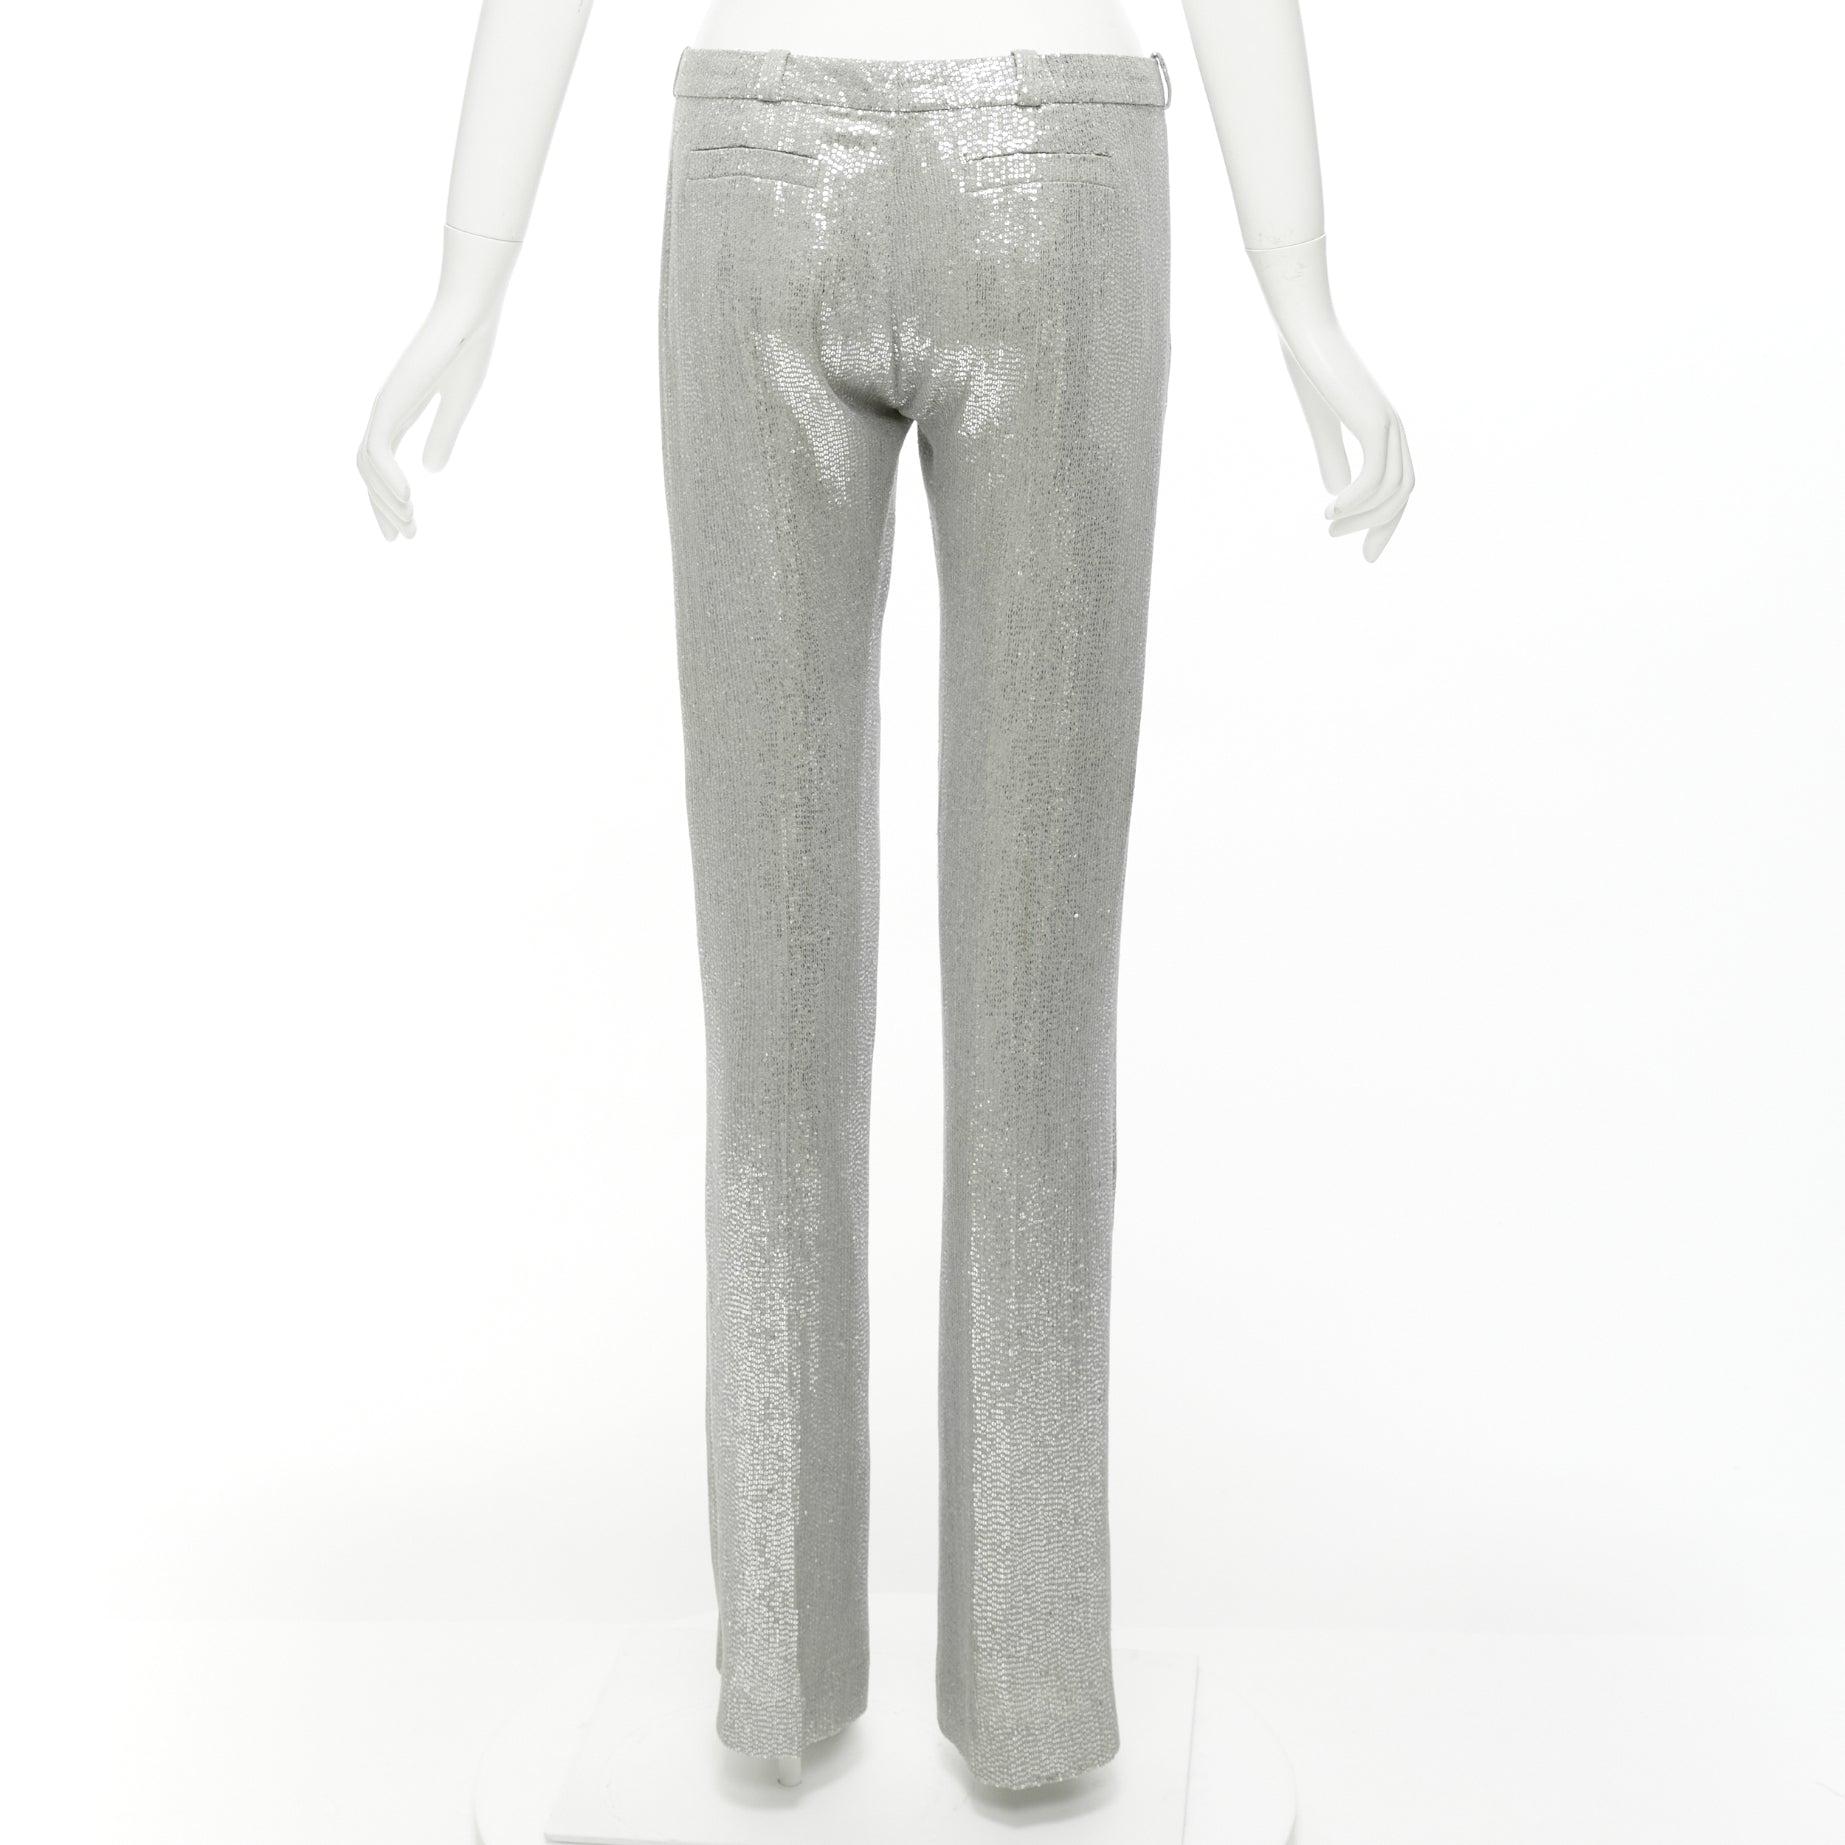 ALEXIS MABILLE 100% silk silver sequinned straight leg trouser pants FR36 S For Sale 1